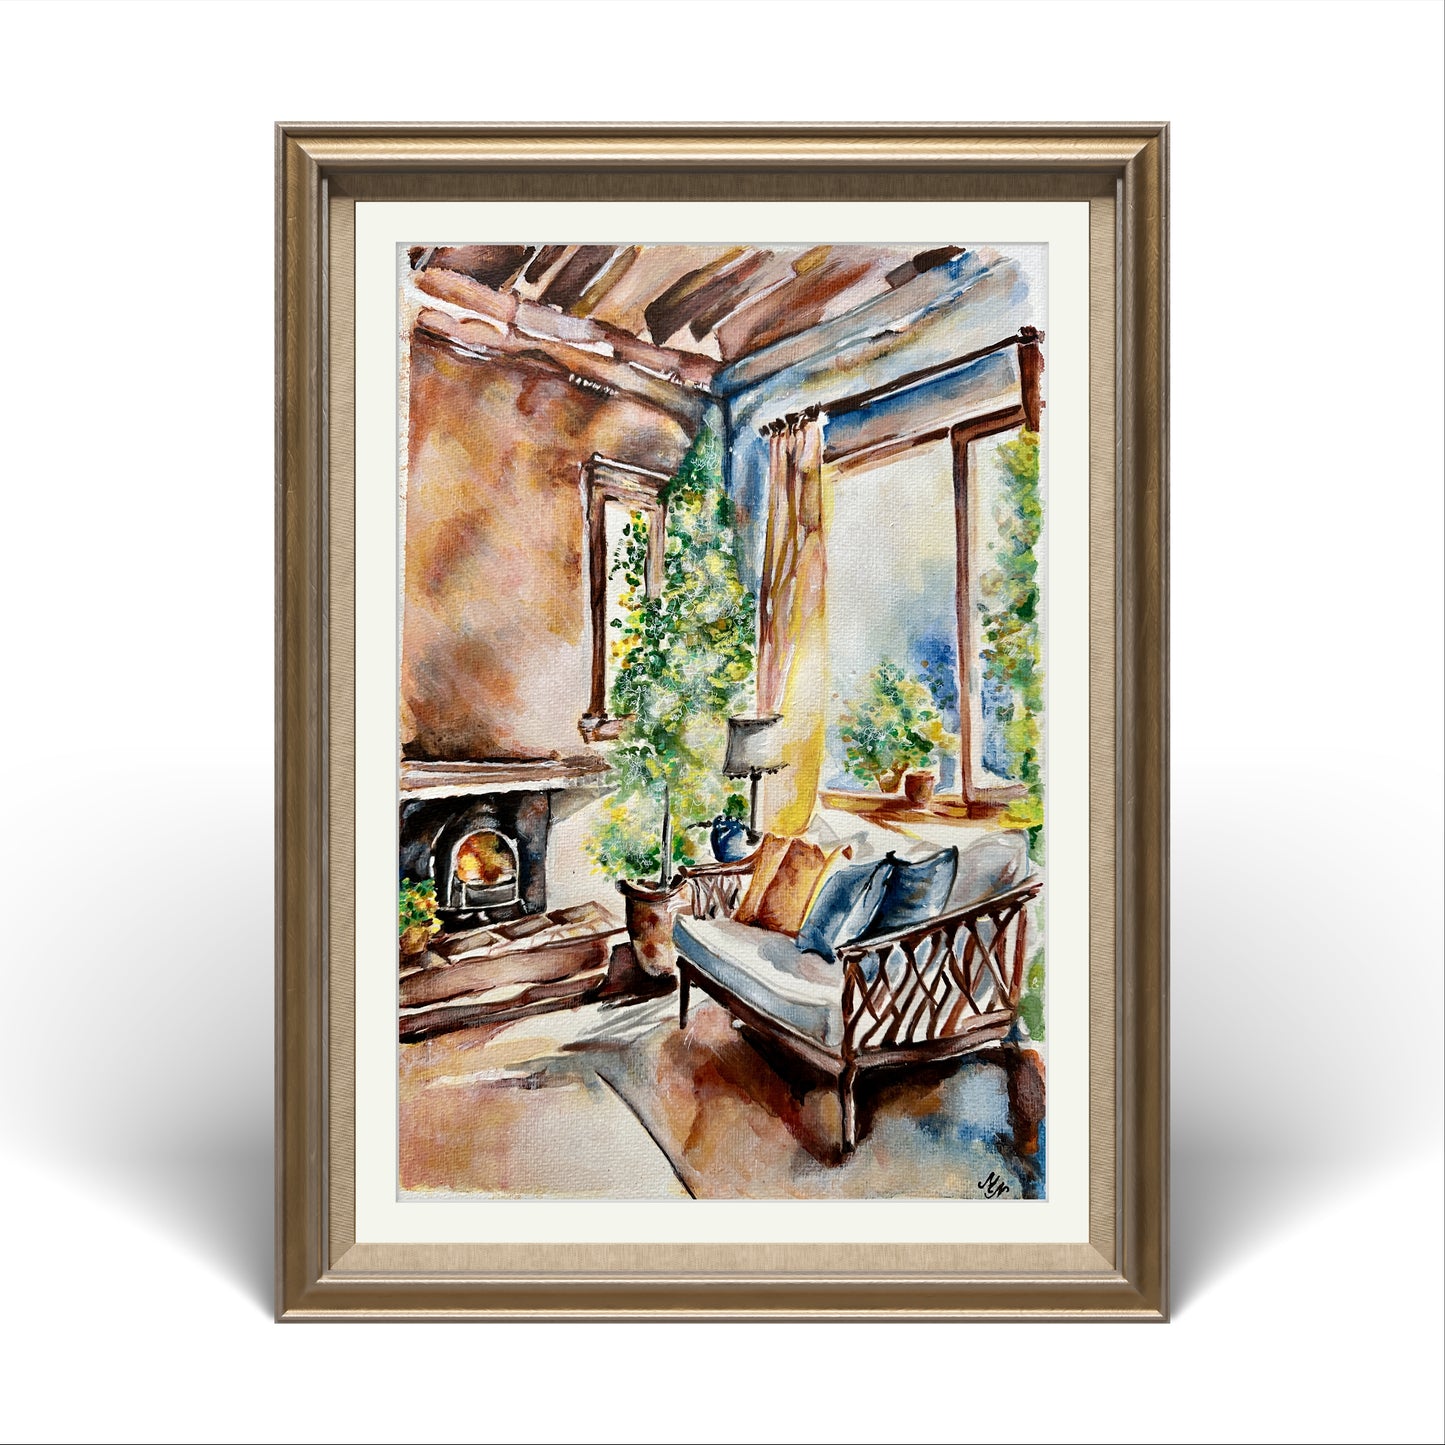 "Warm, sunlit garden room with a golden glow, filled with vibrant greenery and blooming flowers."